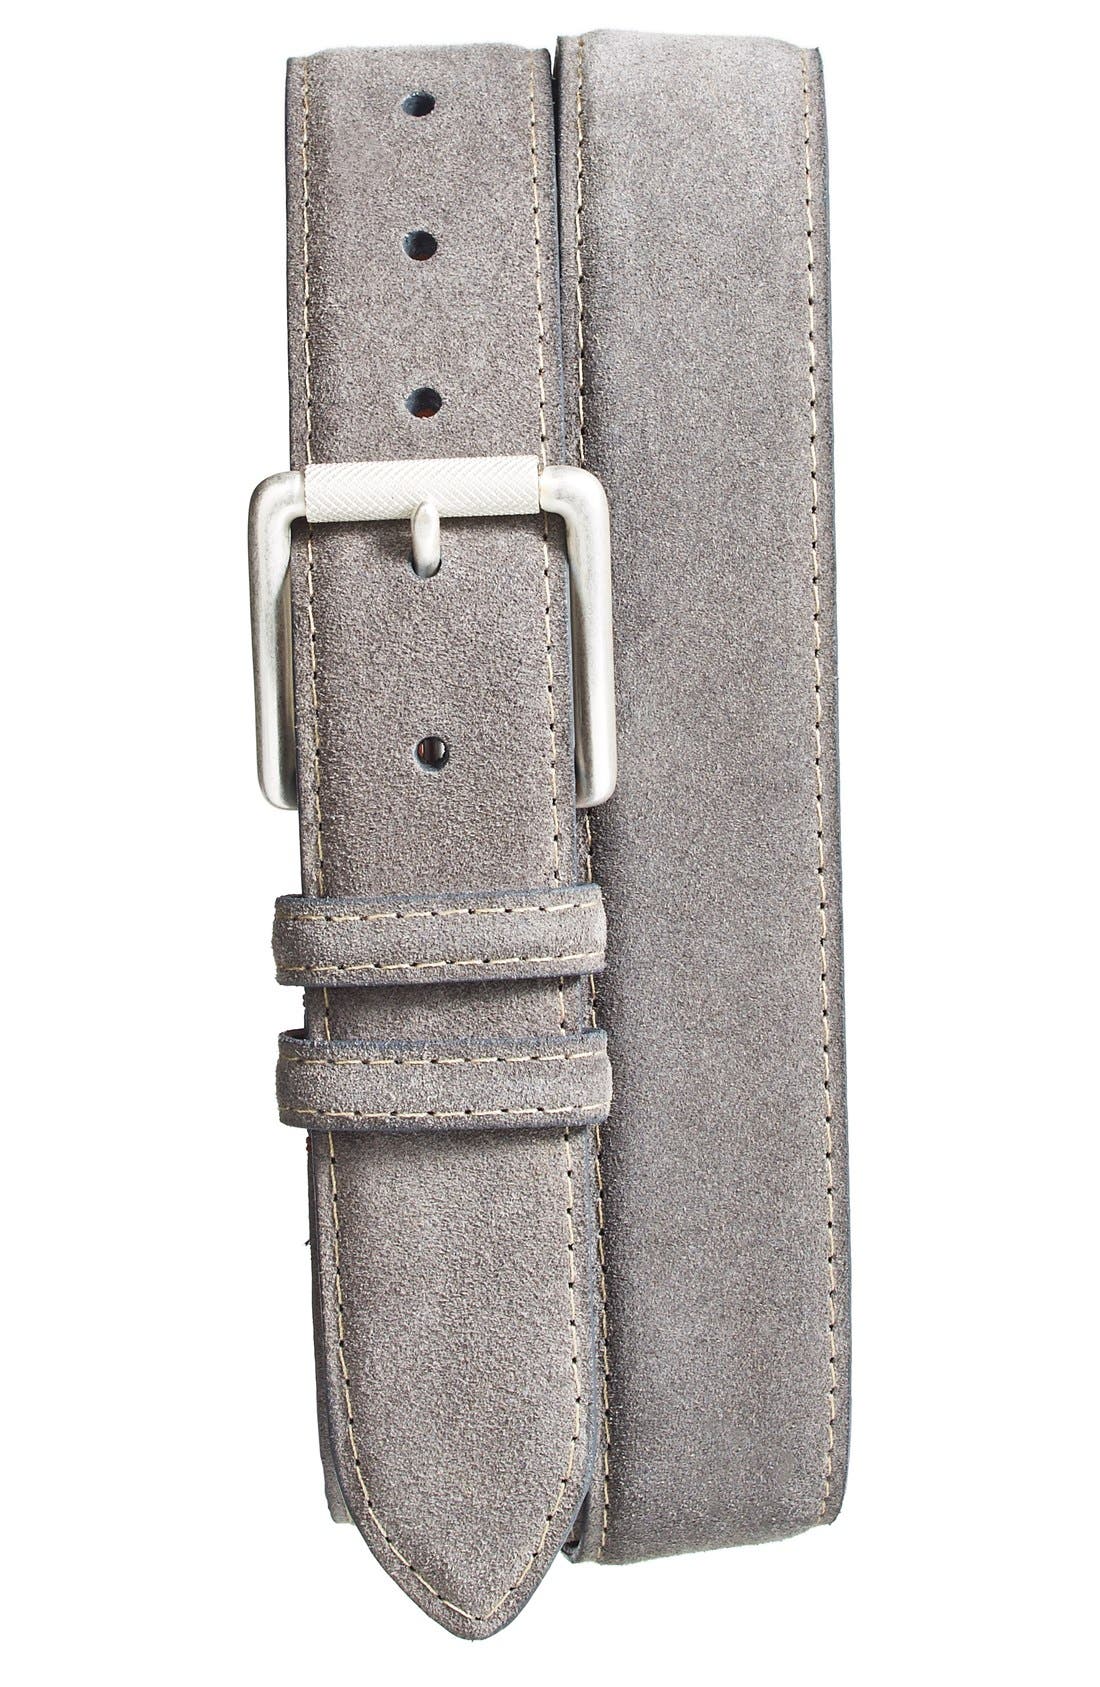 48/" NEW MENS GREY LEATHER BELT STYLE 5401 SIZE 32/"